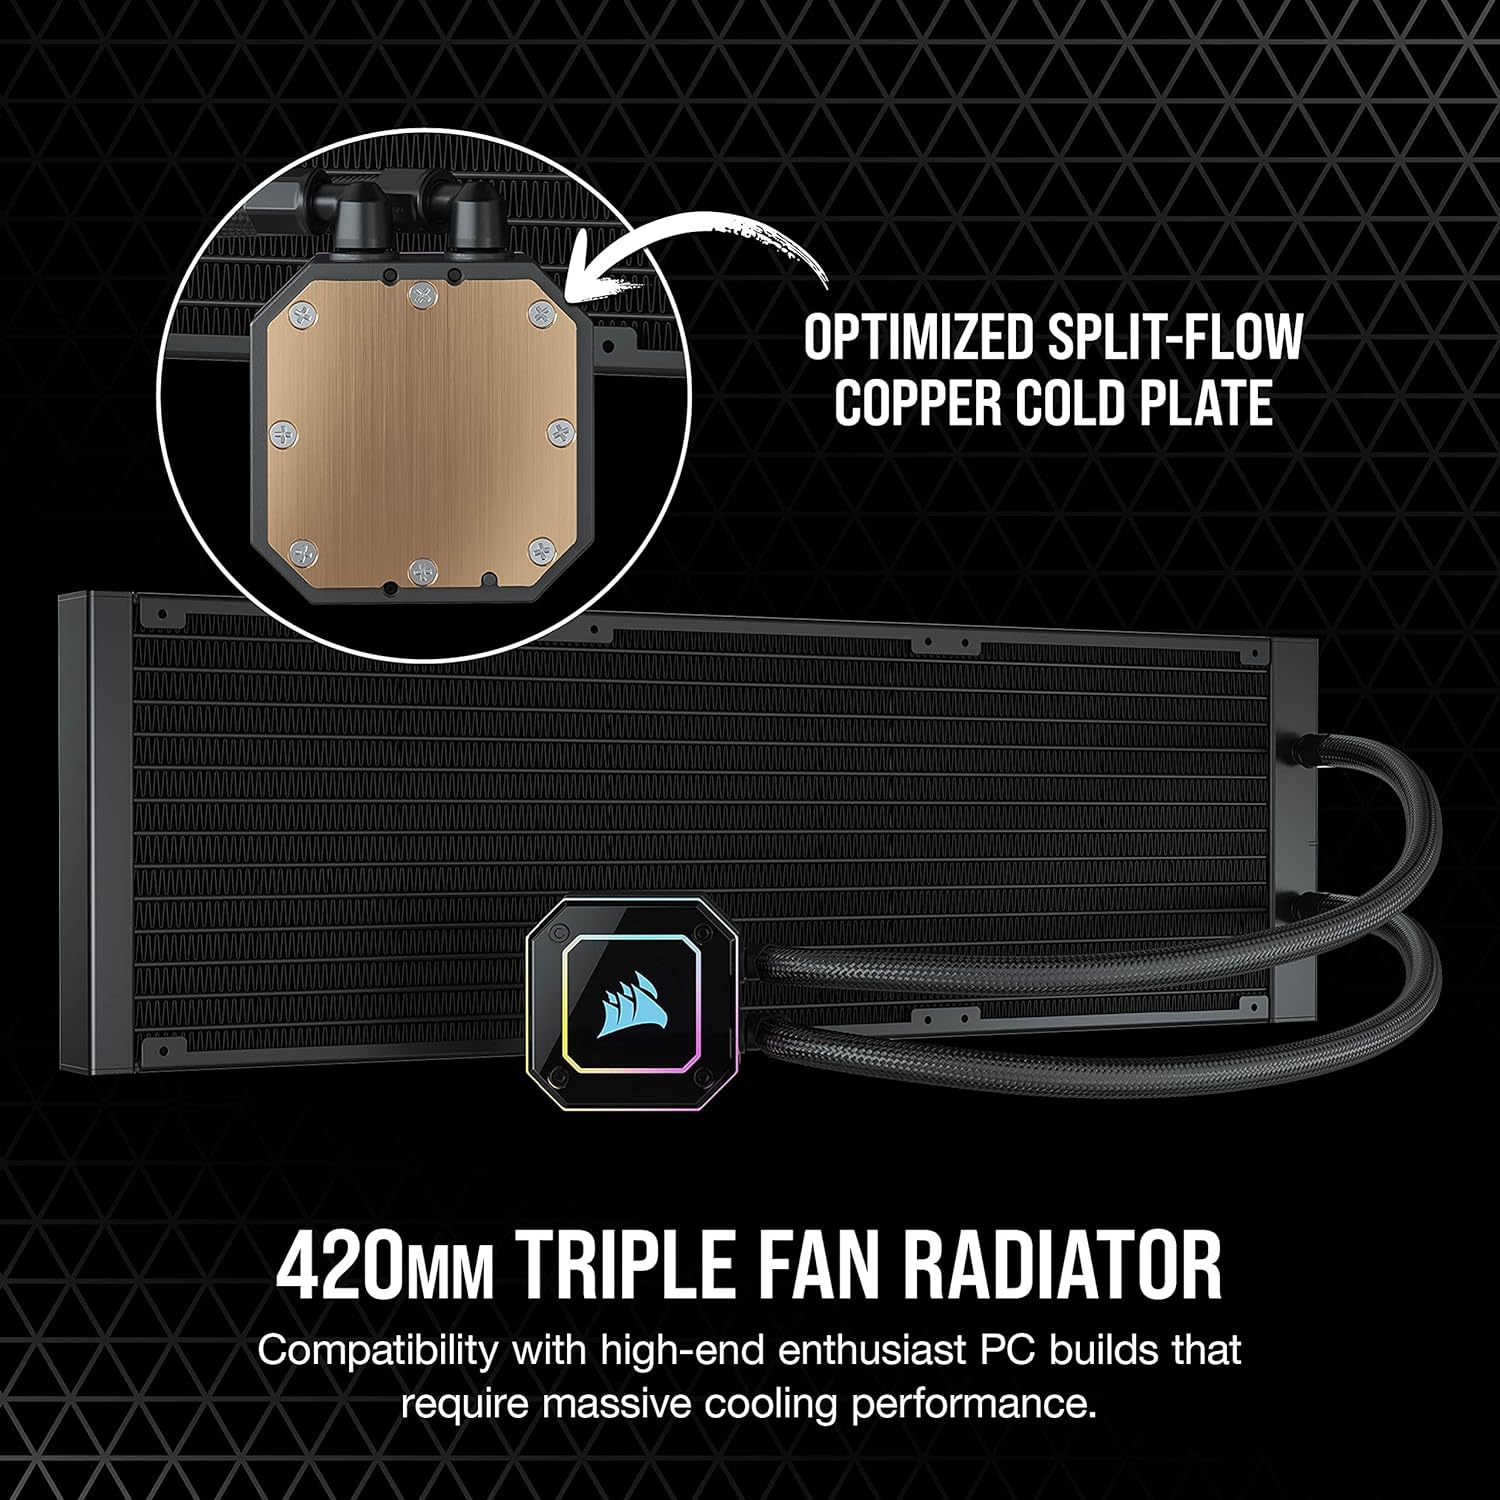 Massive 420mm Radiator for extreme cooling performance - Ideal for high-powered systems. 0840006643432